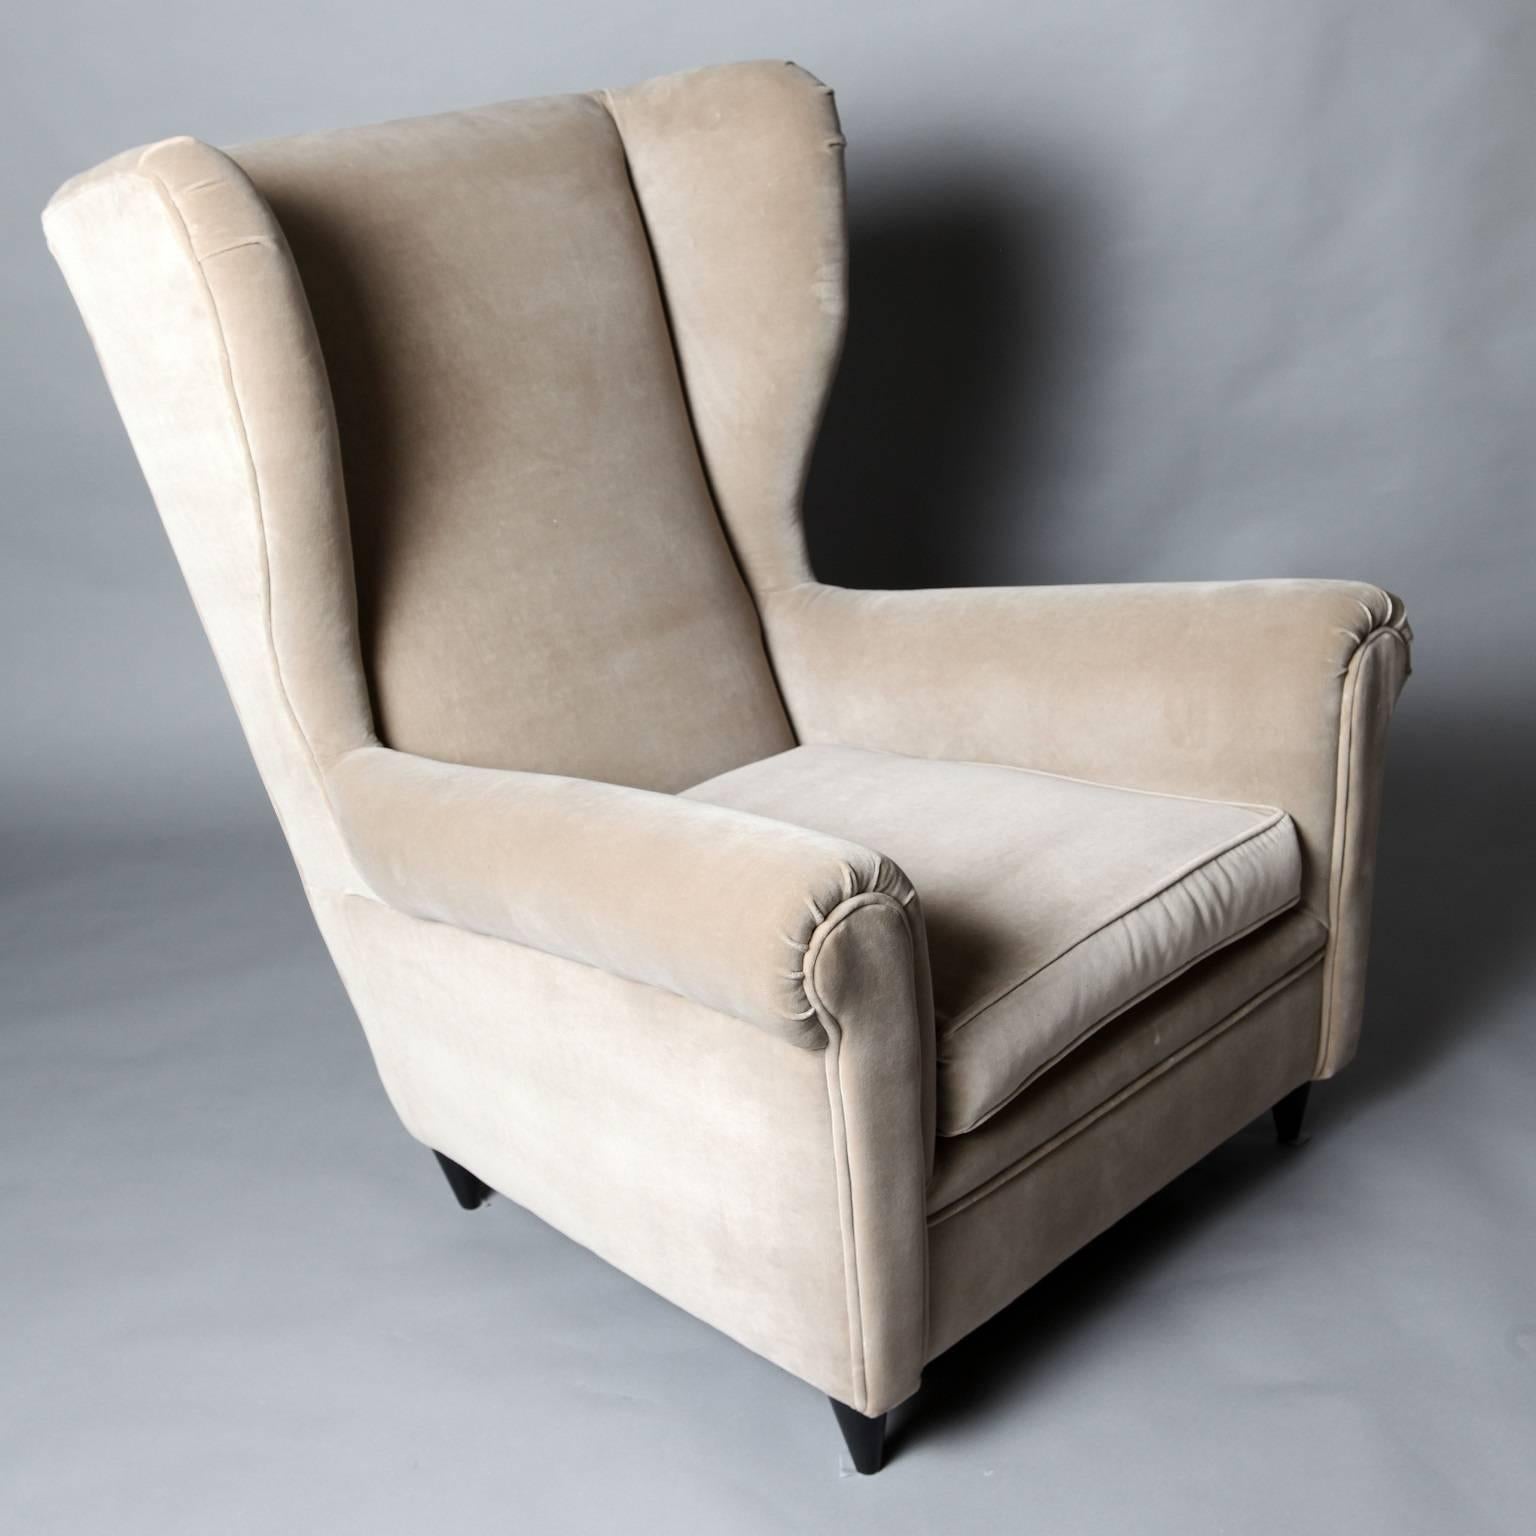 A pair of reupholstered armchairs in the style of Gio Ponti, circa 1950.